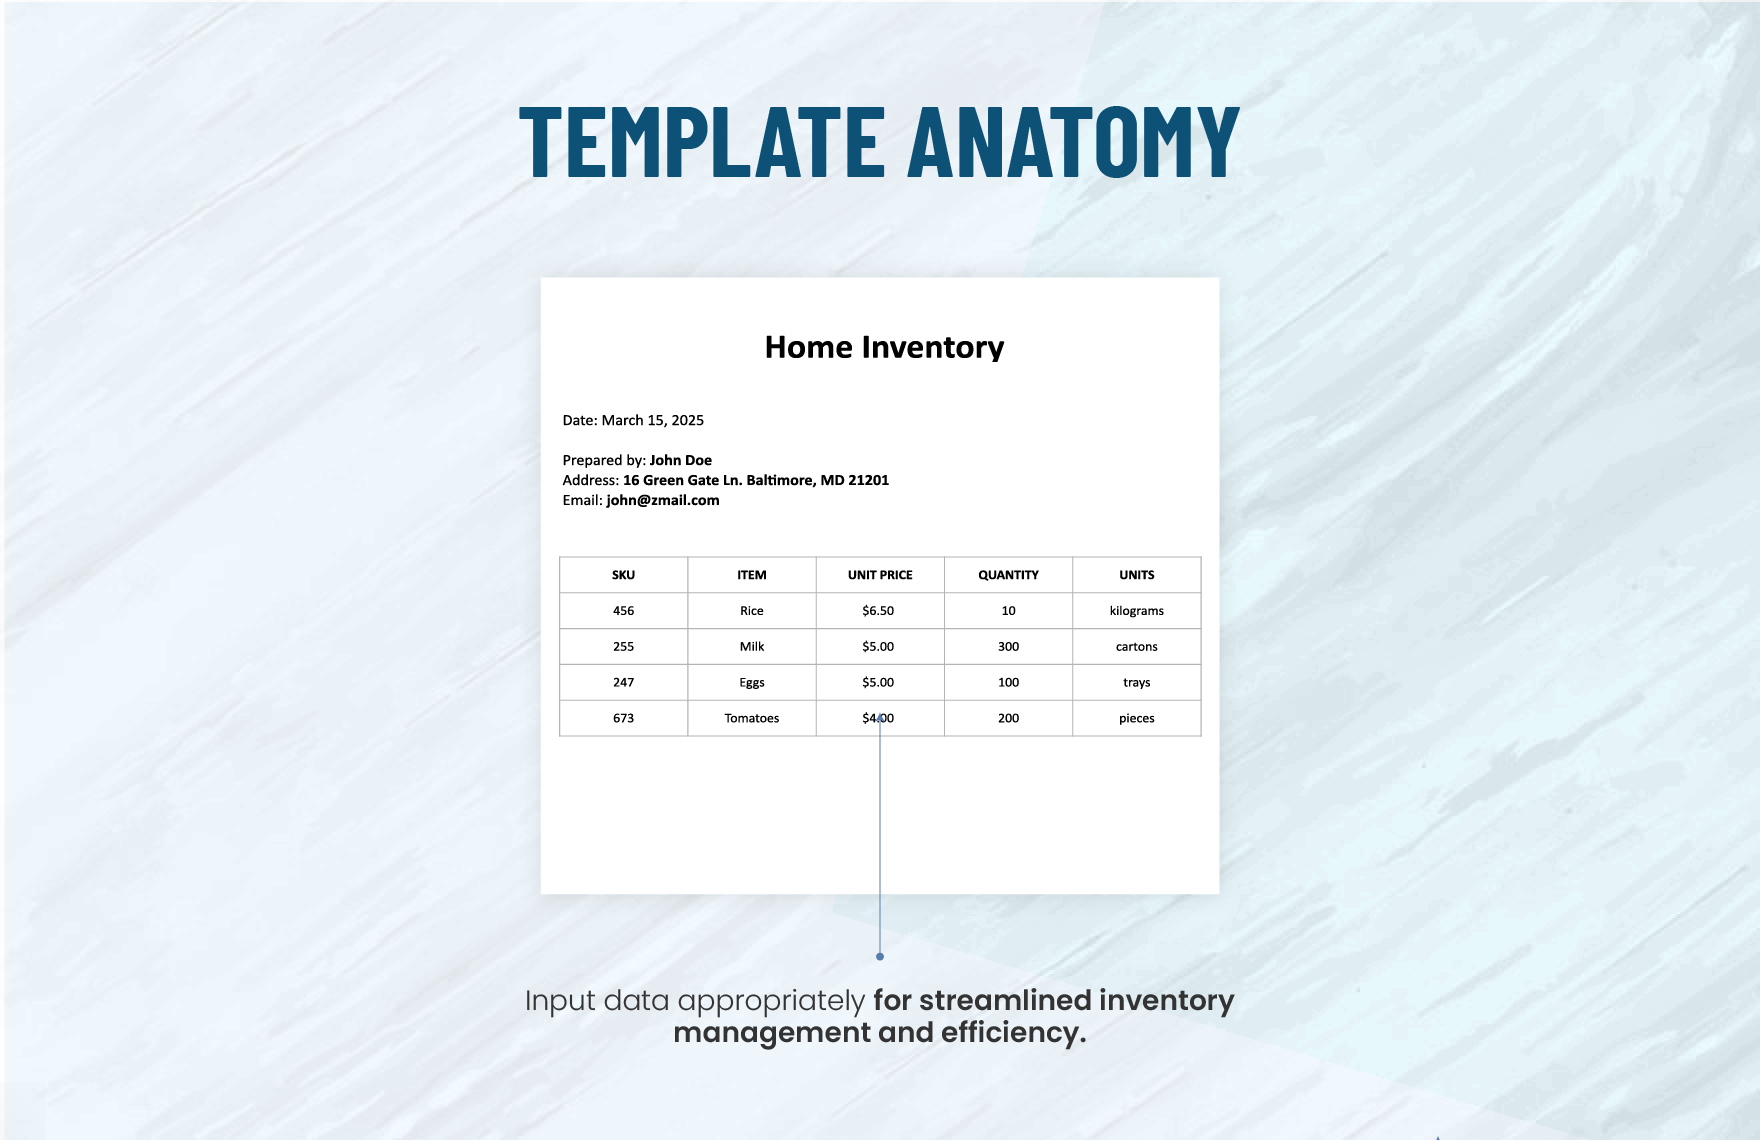 Home Inventory Spreadsheet Template